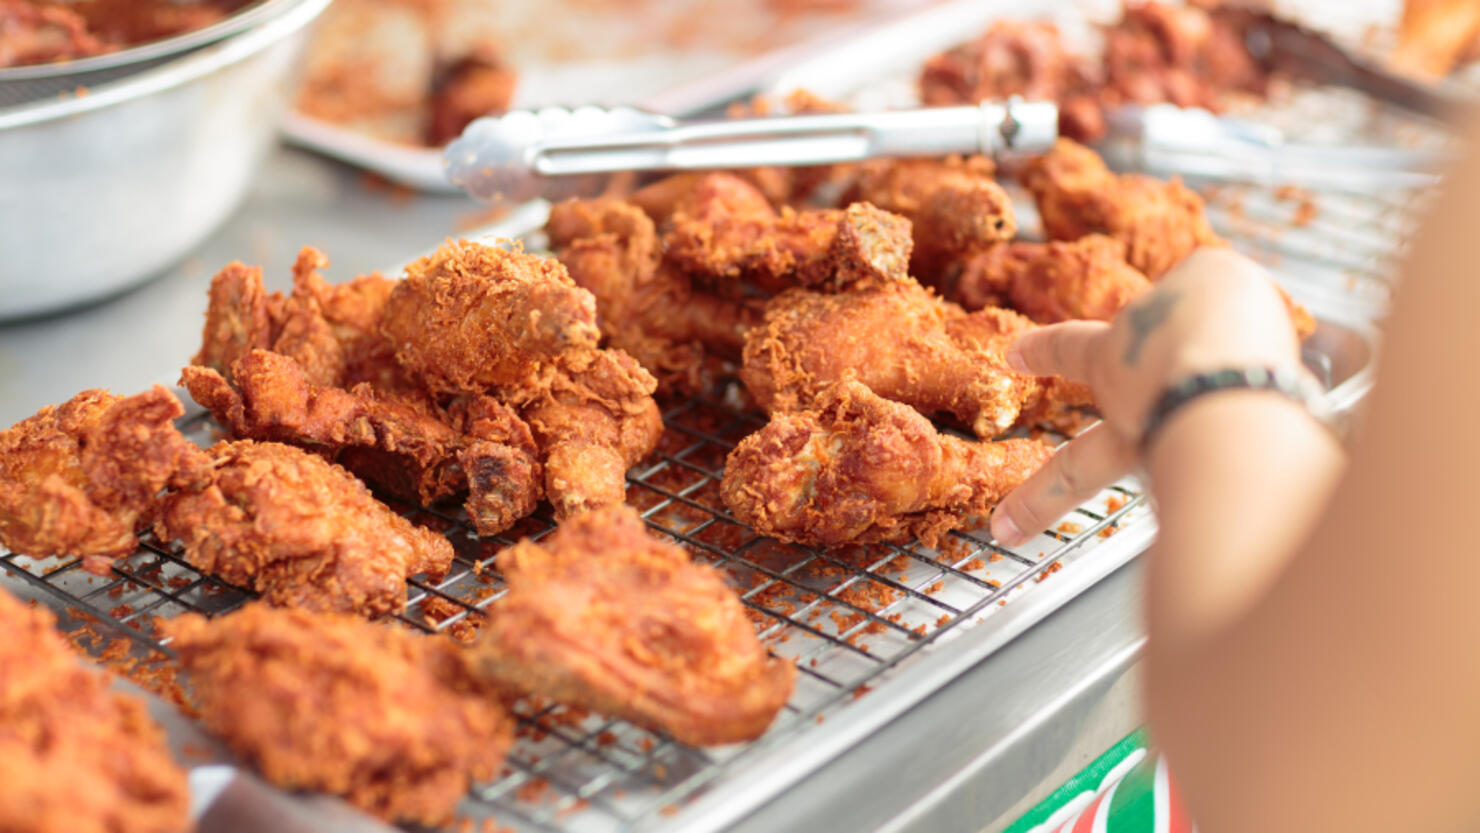 New Orleans Fried Chicken Festival Returns In 2021 At New Location | iHeart